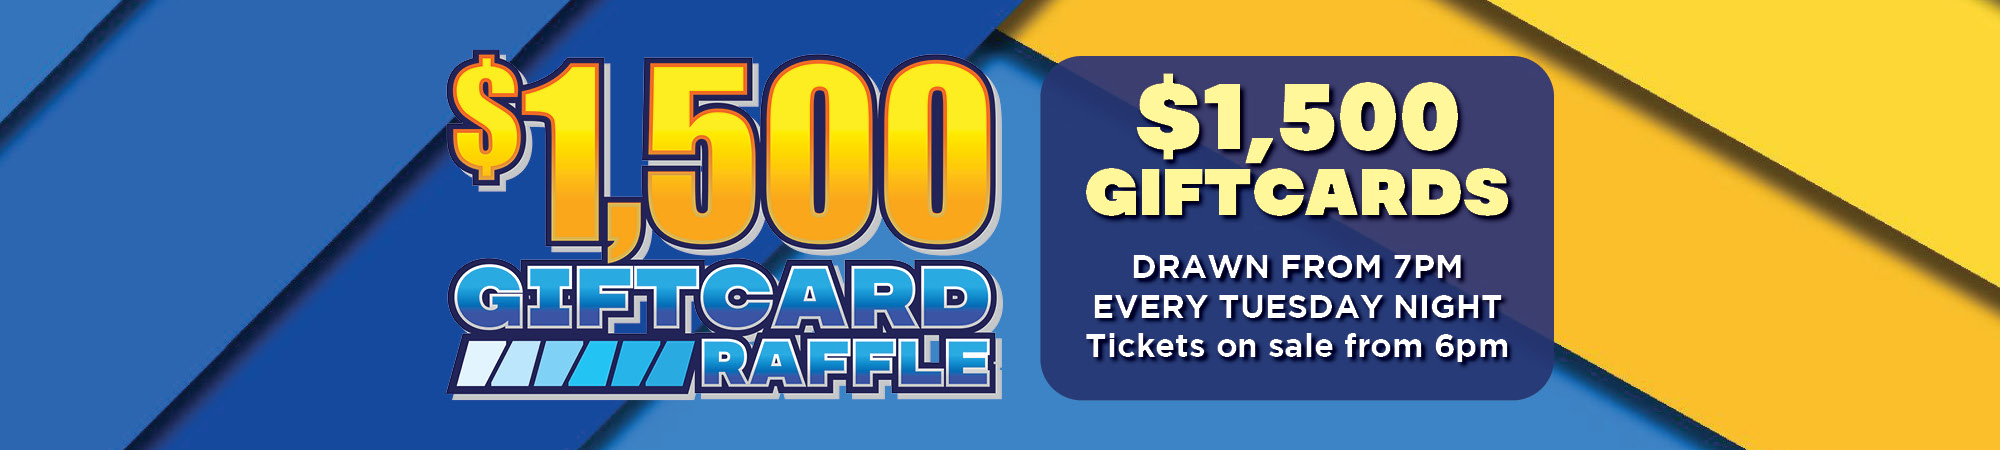 Tuesday Night $1,500 Gift Card Raffle at Guildford Leagues. Drawn from 7pm every Tuesday Night. Tickets on sale from 6pm